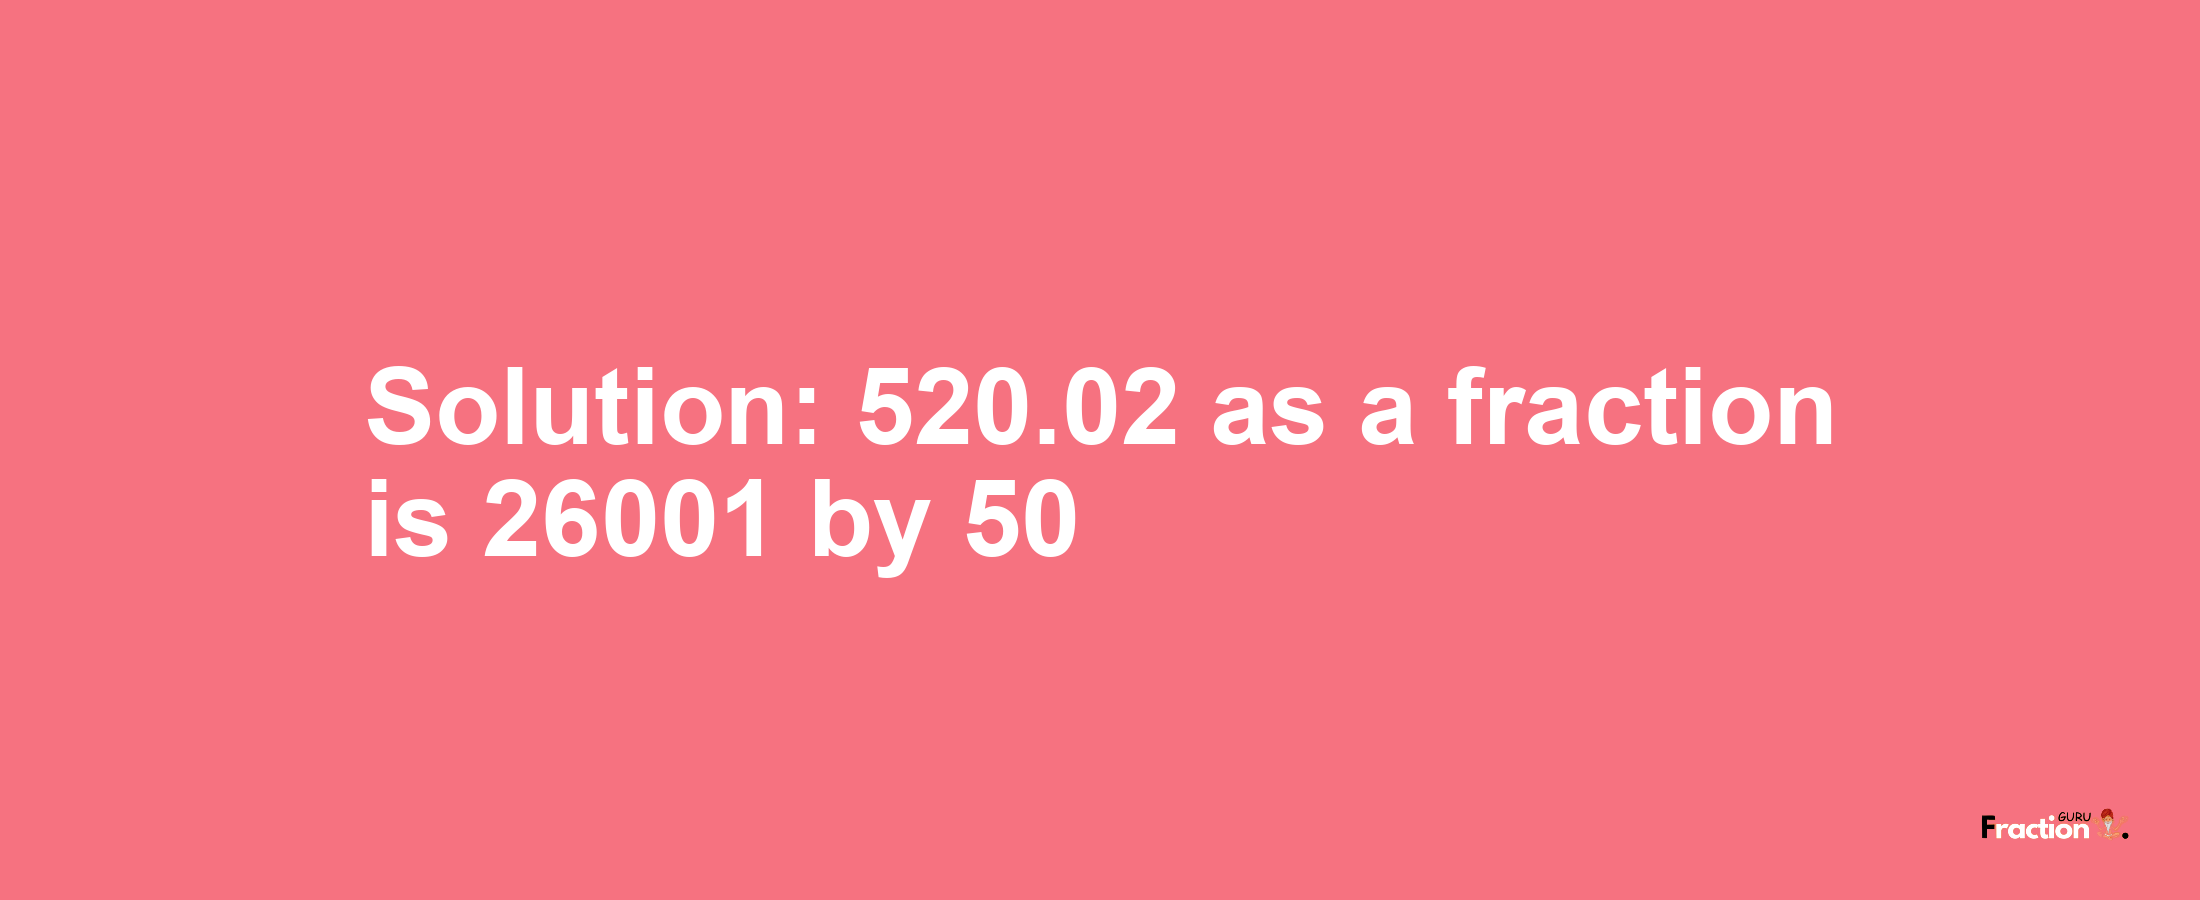 Solution:520.02 as a fraction is 26001/50